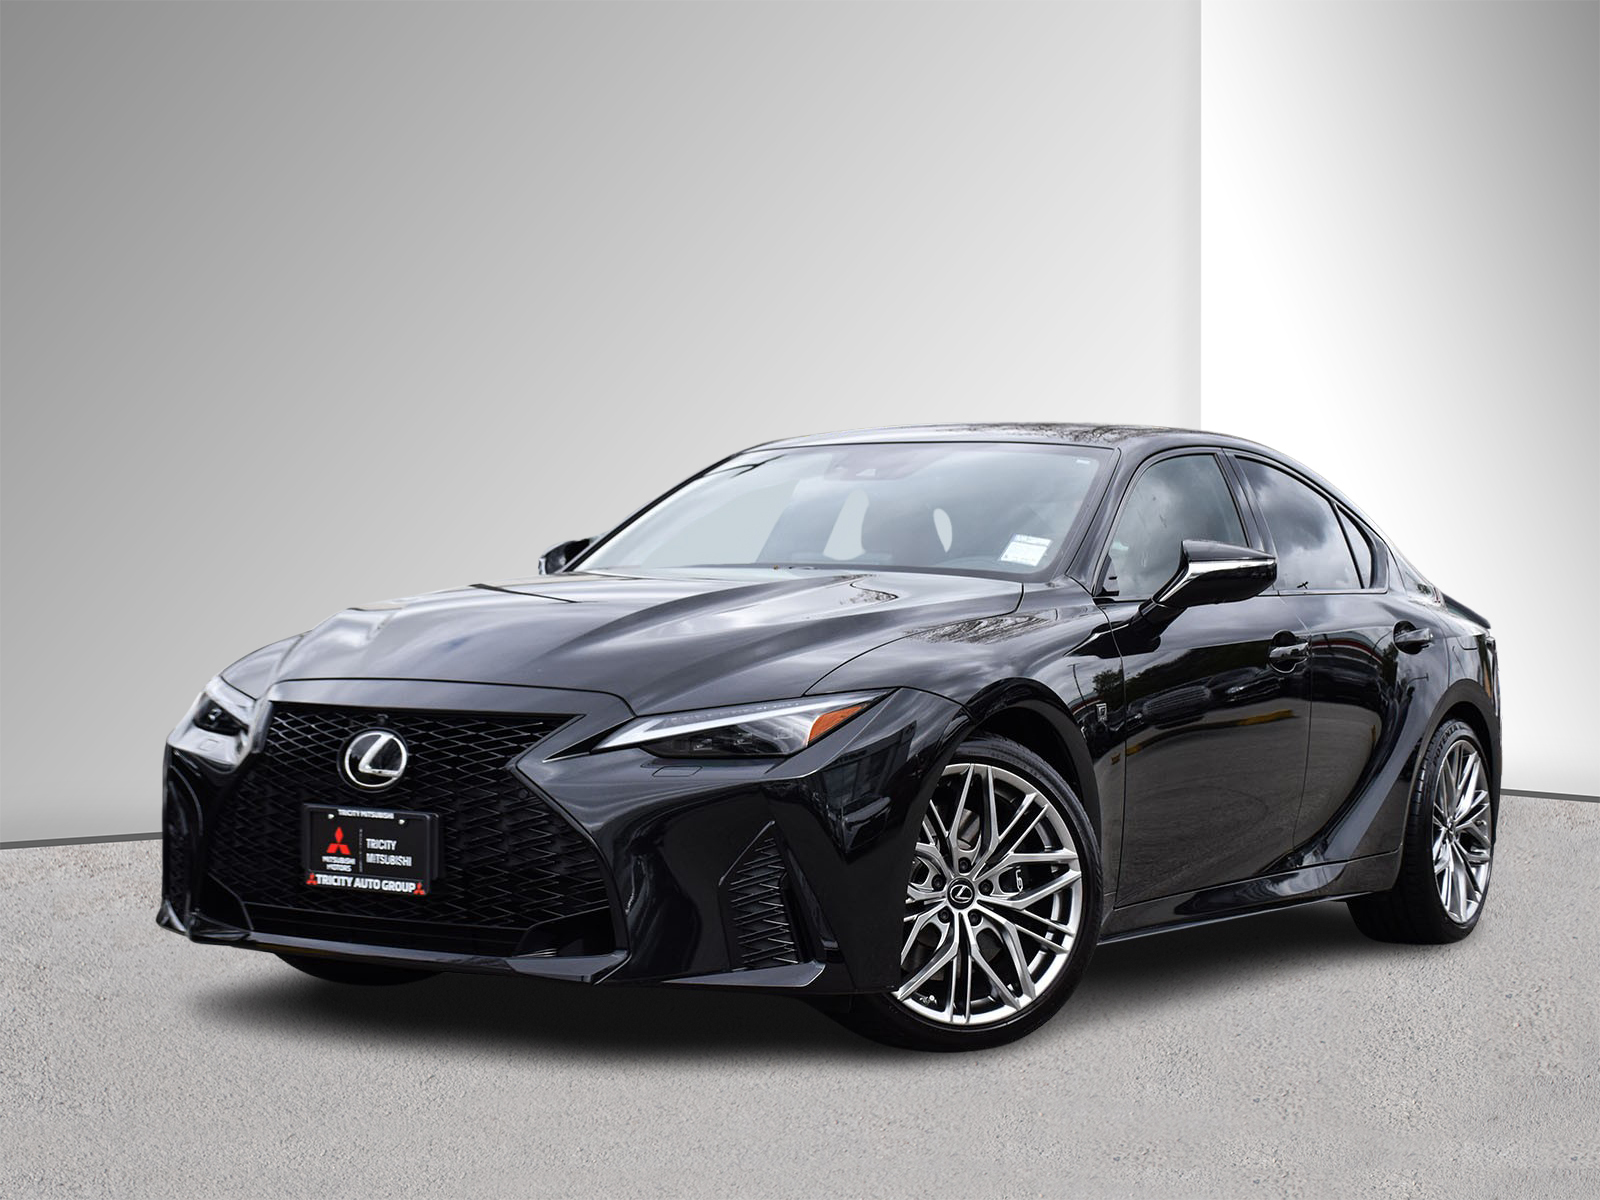 2022 Lexus IS 500 - No Accidents, Red Leather Interior, Navi